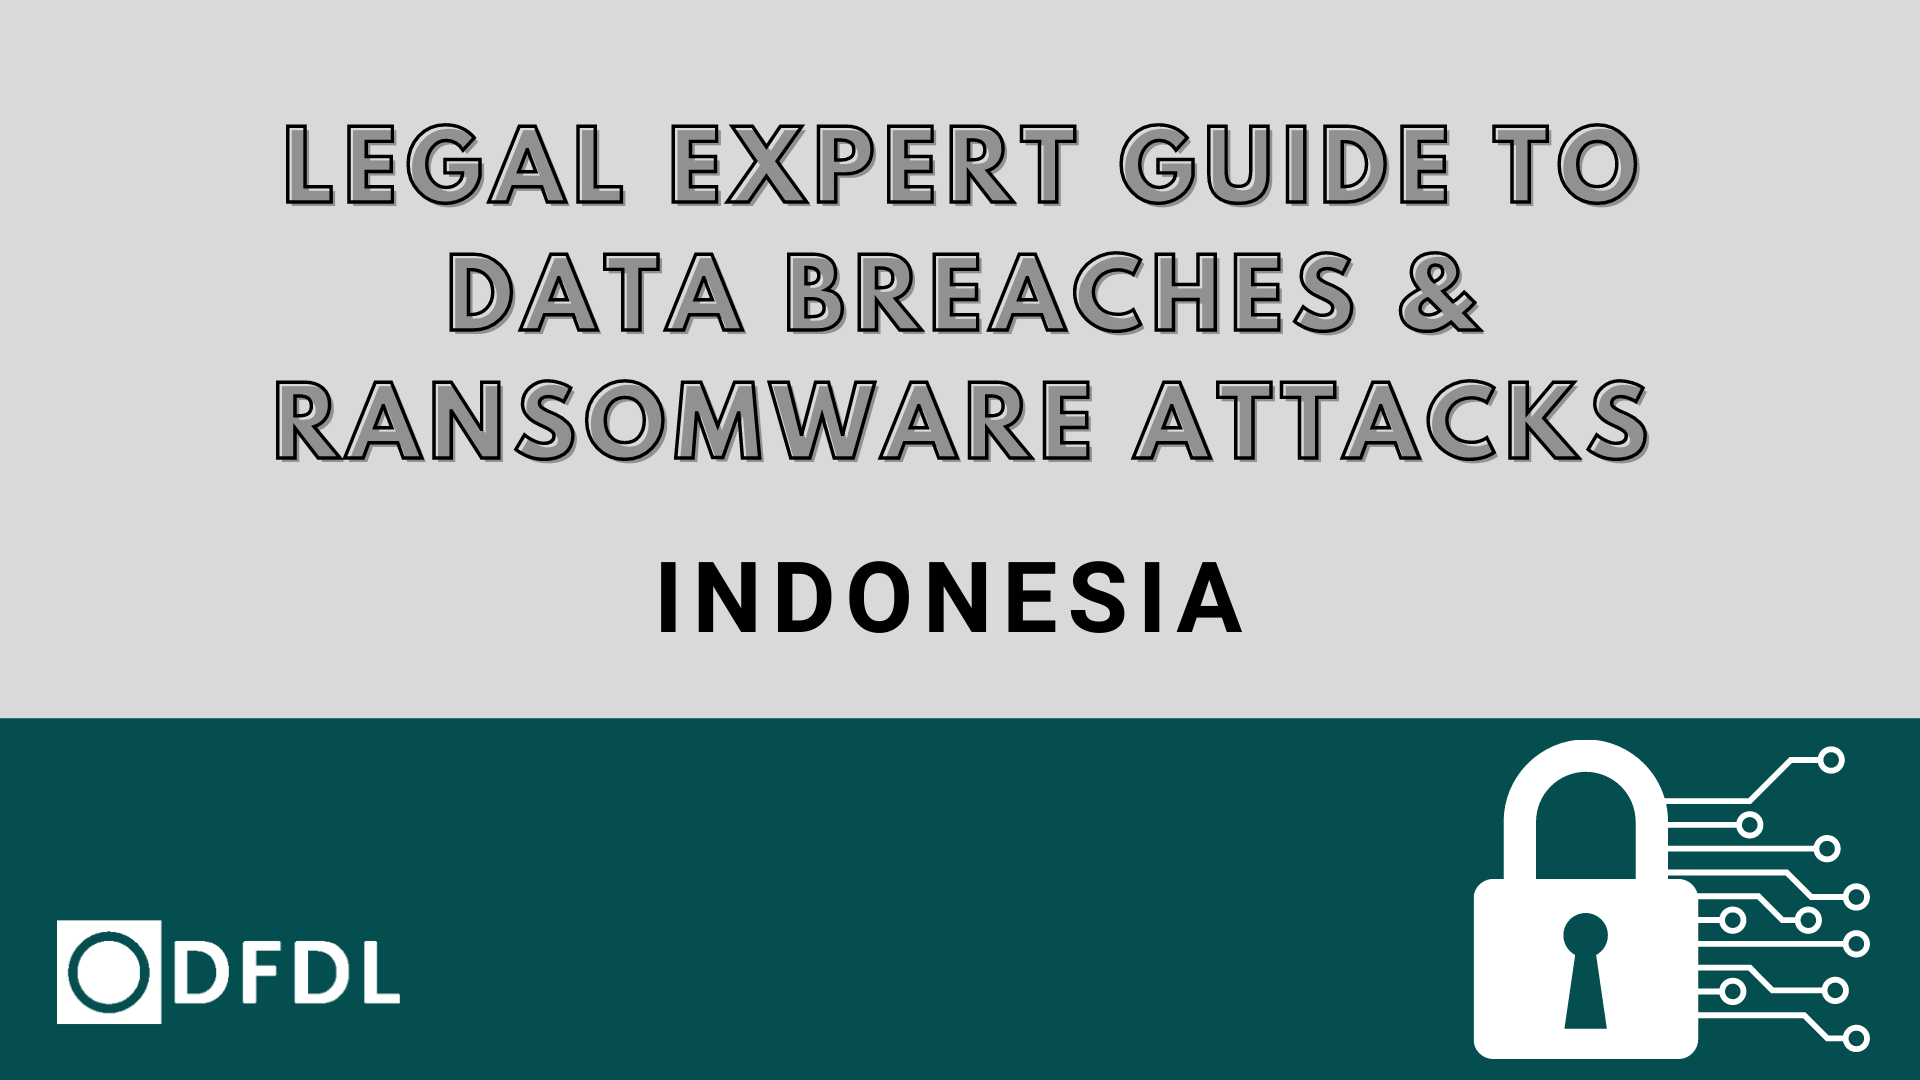 Legal Expert Guide to Data Breaches & Ransomware Attacks in Indonesia